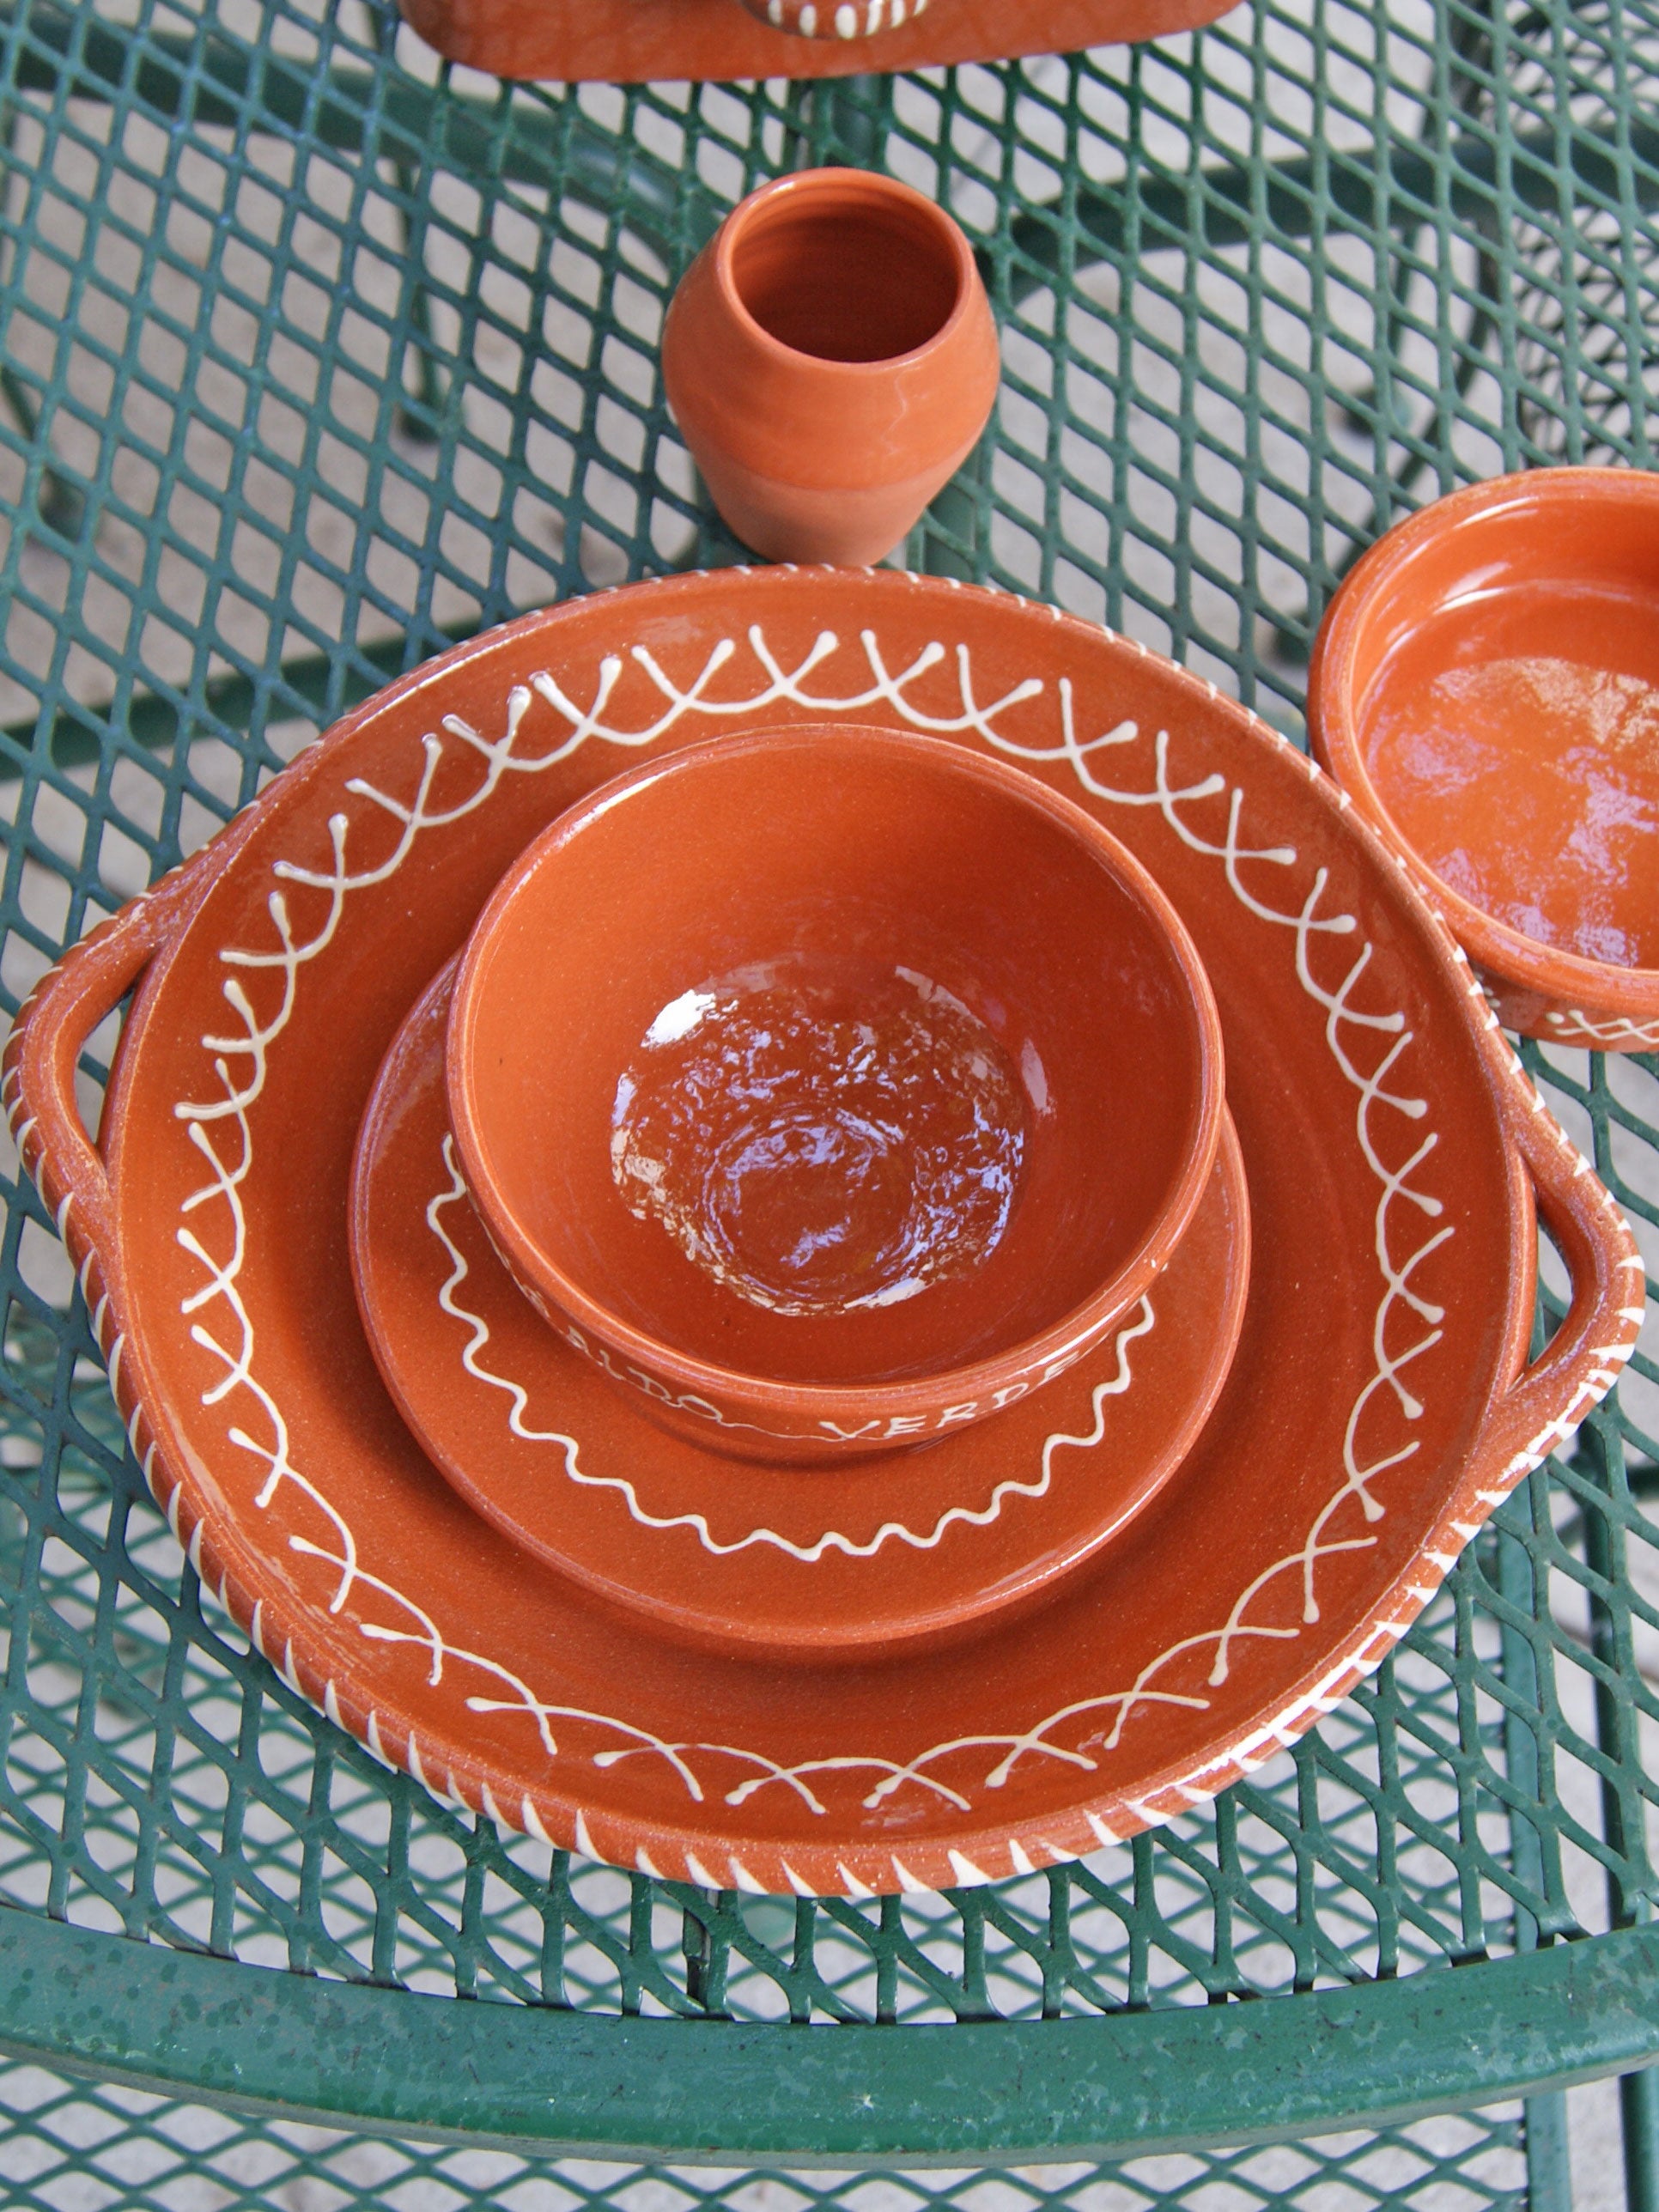 Portuguese Pottery Terracotta Glazed Clay Soup Bowls with Plate - Set of 4